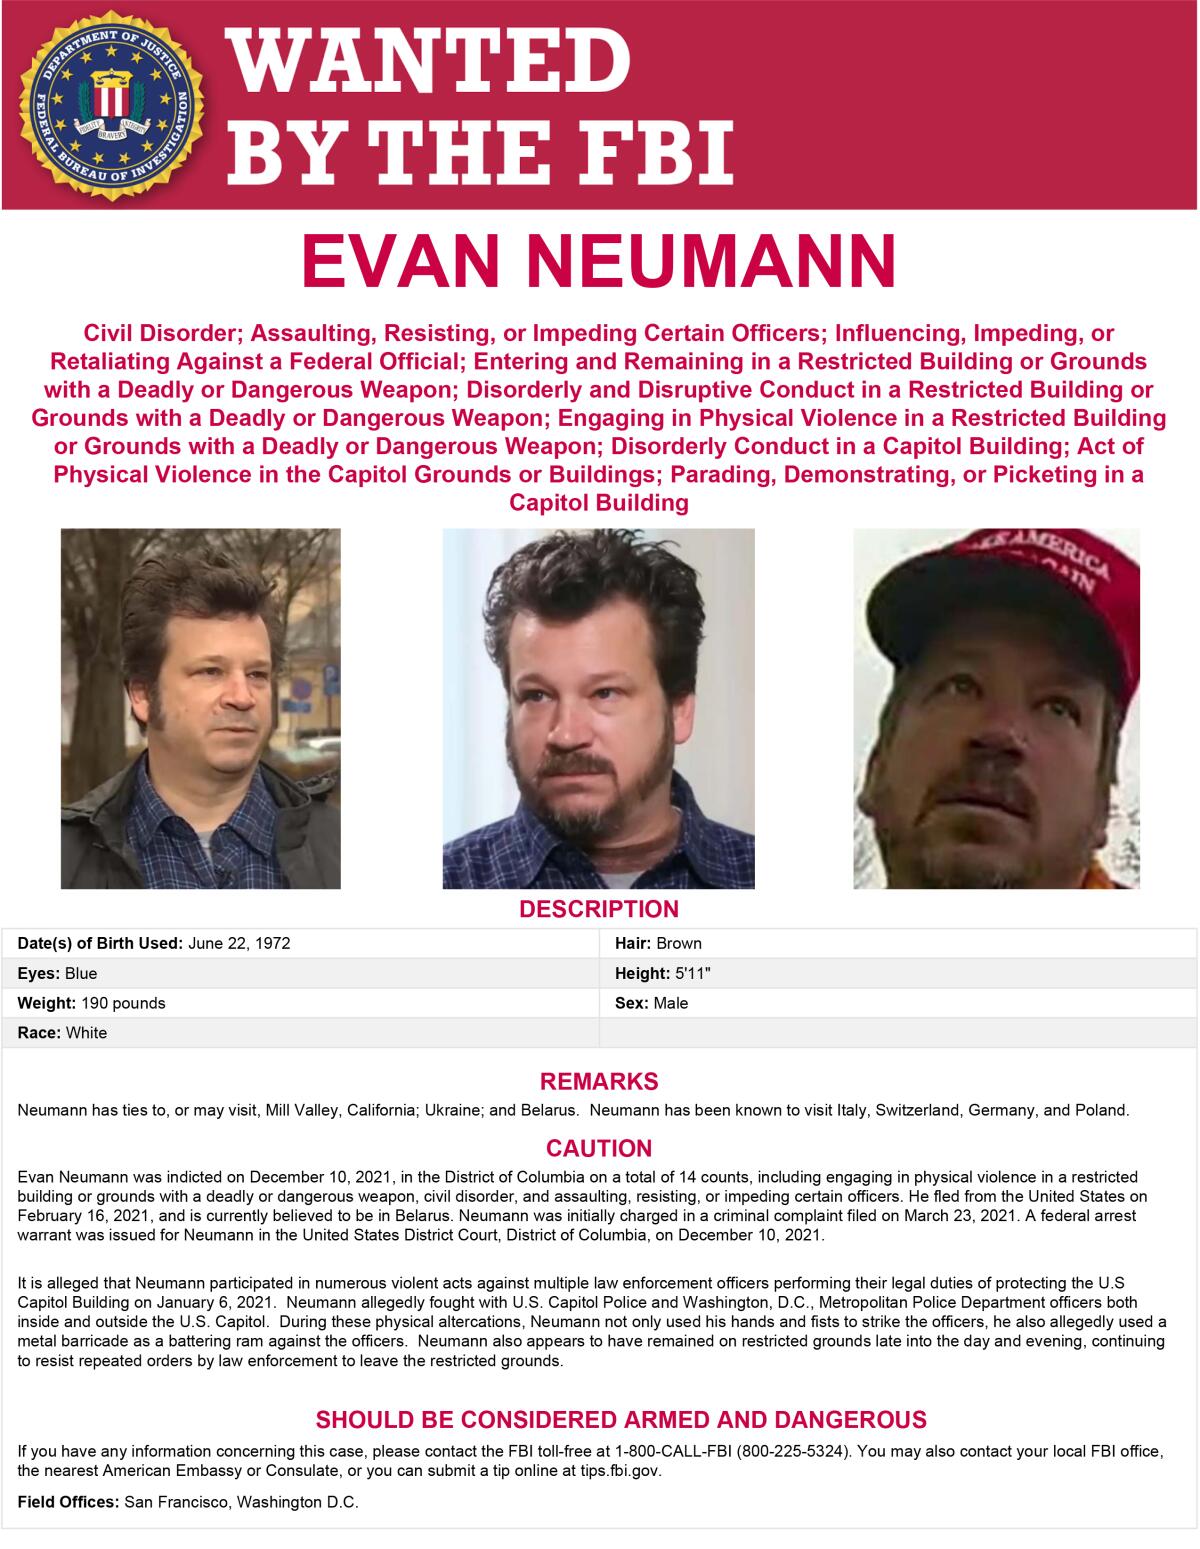 A "Wanted by the FBI" poster shows three photos of a man.